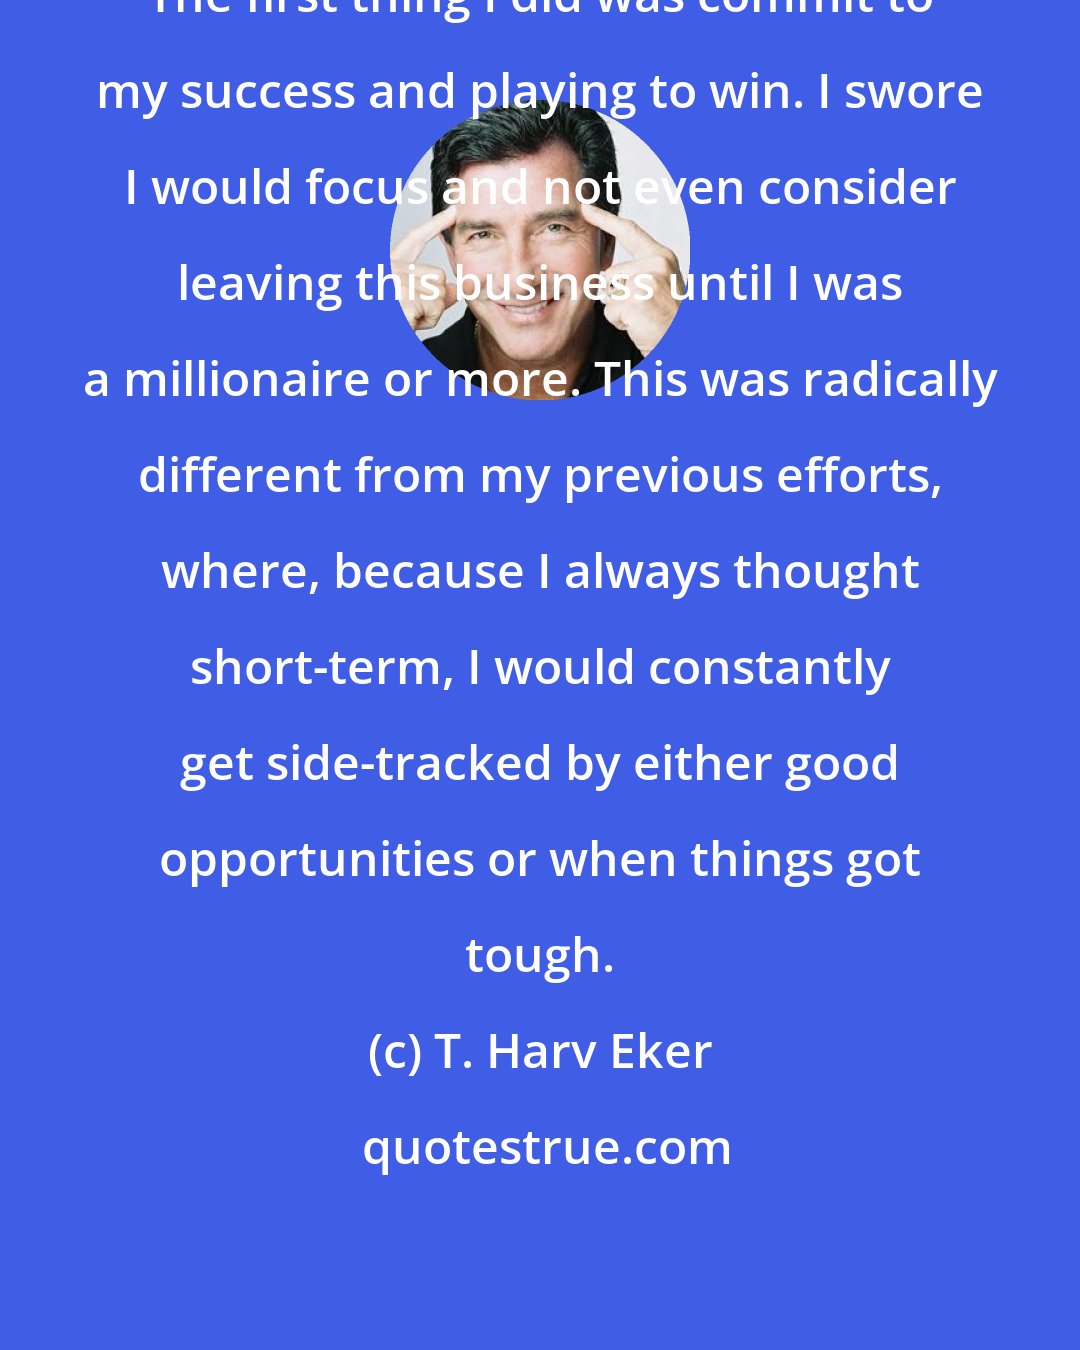 T. Harv Eker: The first thing I did was commit to my success and playing to win. I swore I would focus and not even consider leaving this business until I was a millionaire or more. This was radically different from my previous efforts, where, because I always thought short-term, I would constantly get side-tracked by either good opportunities or when things got tough.